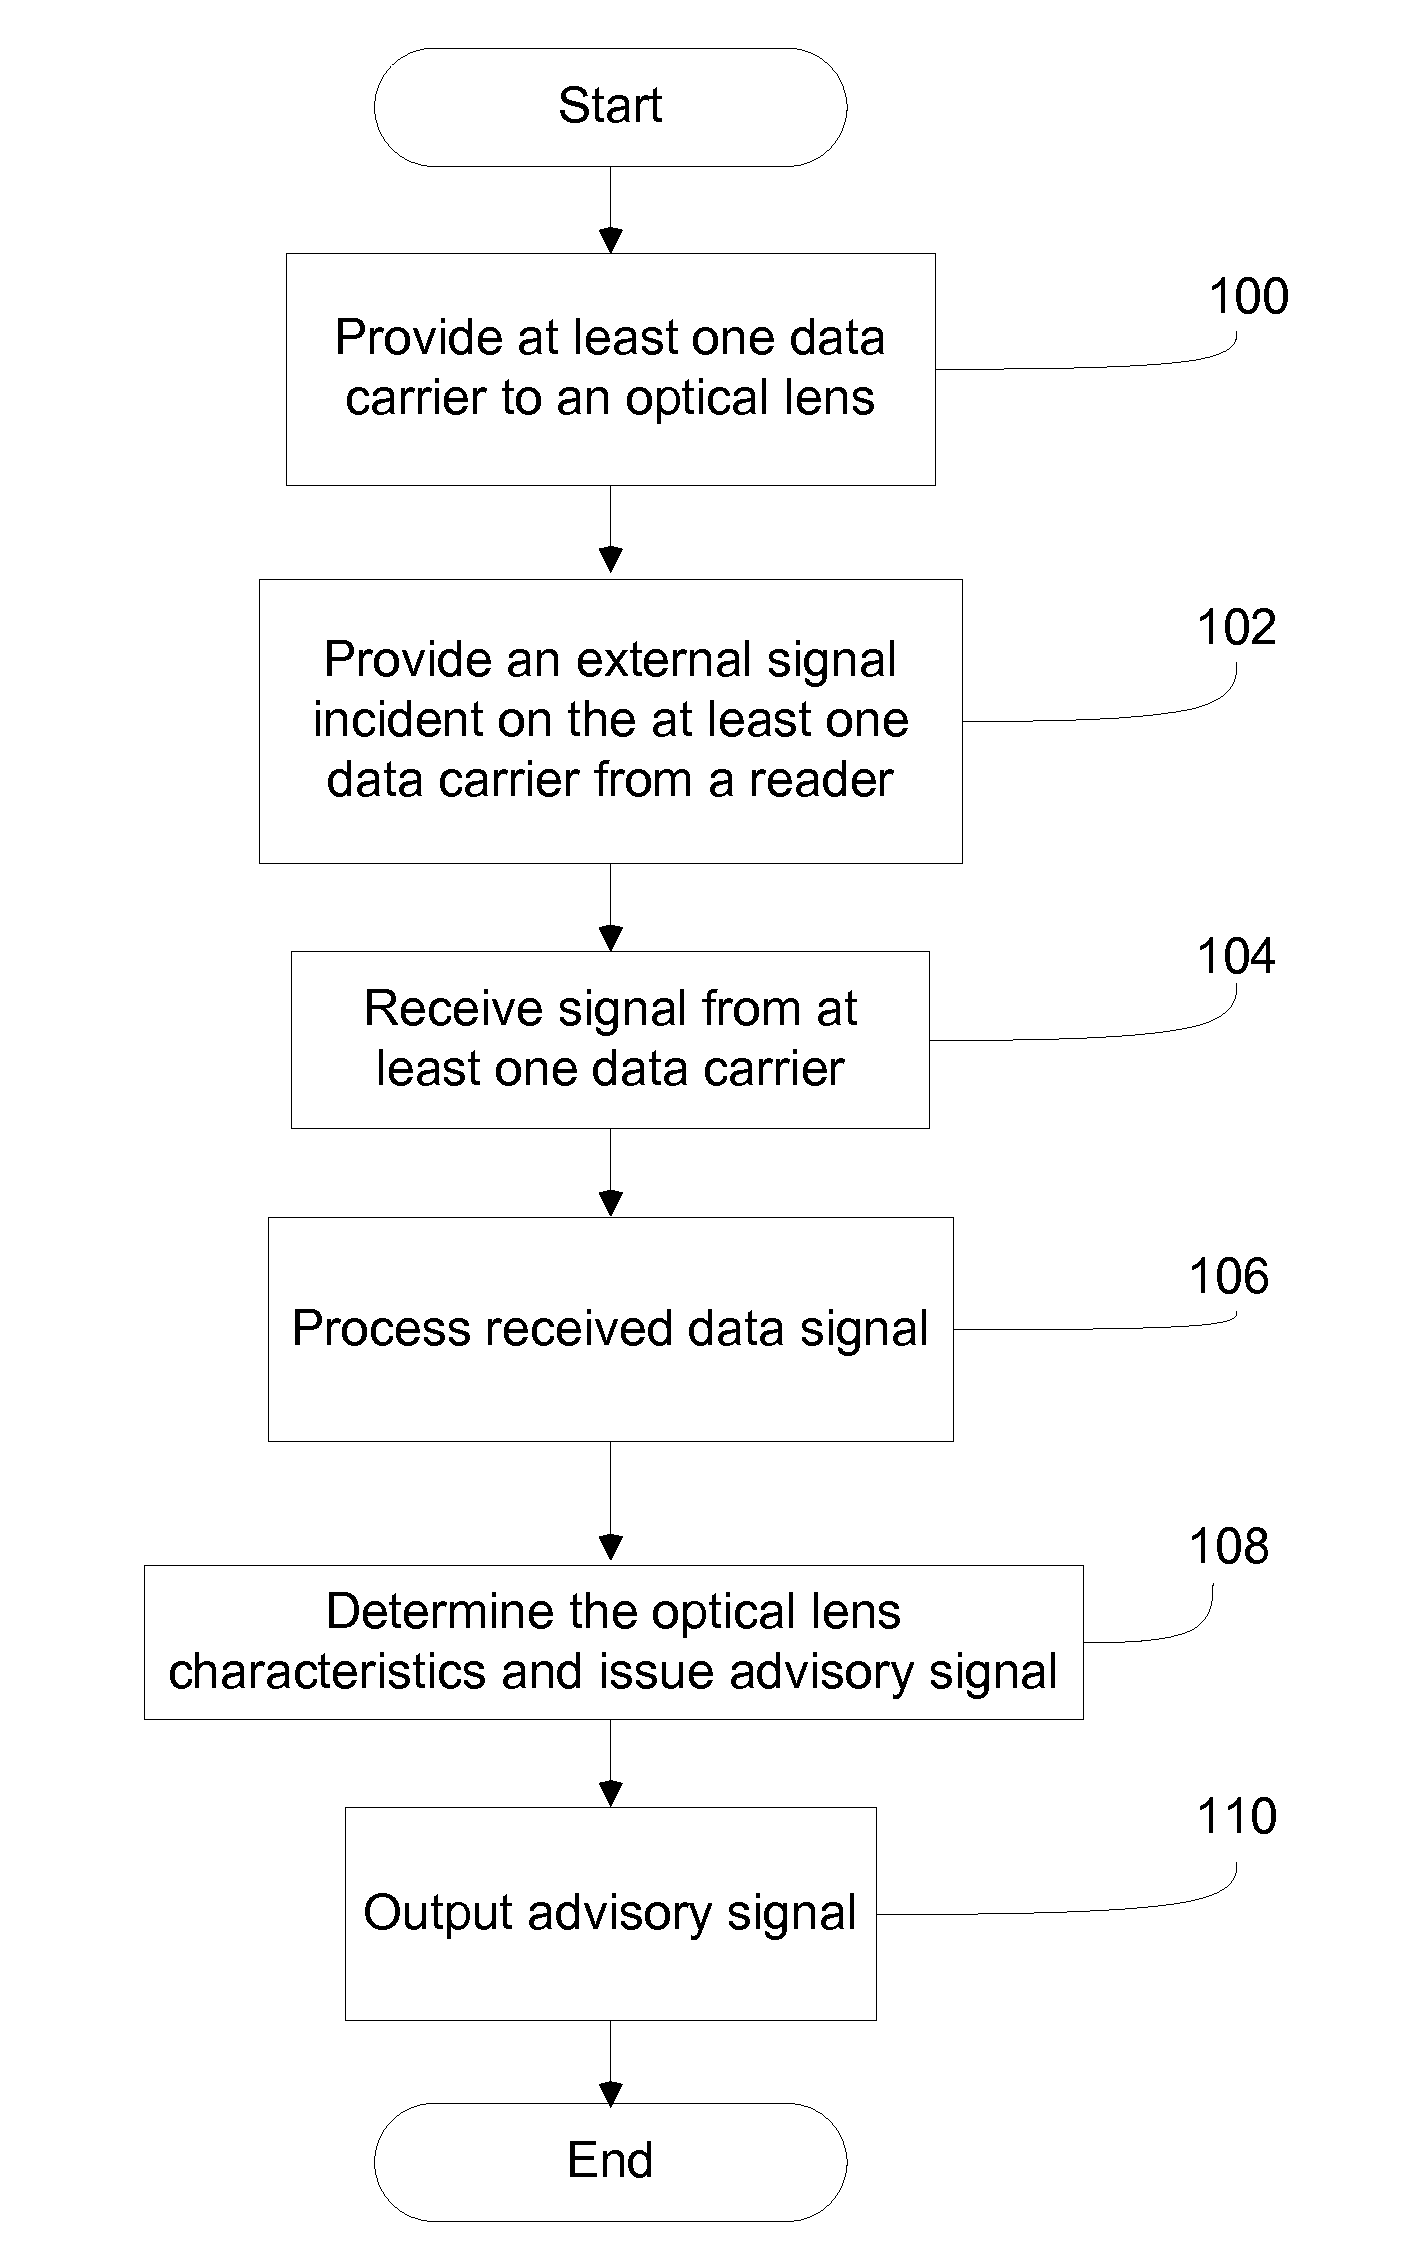 Method and System for Contact Lens Care and Compliance